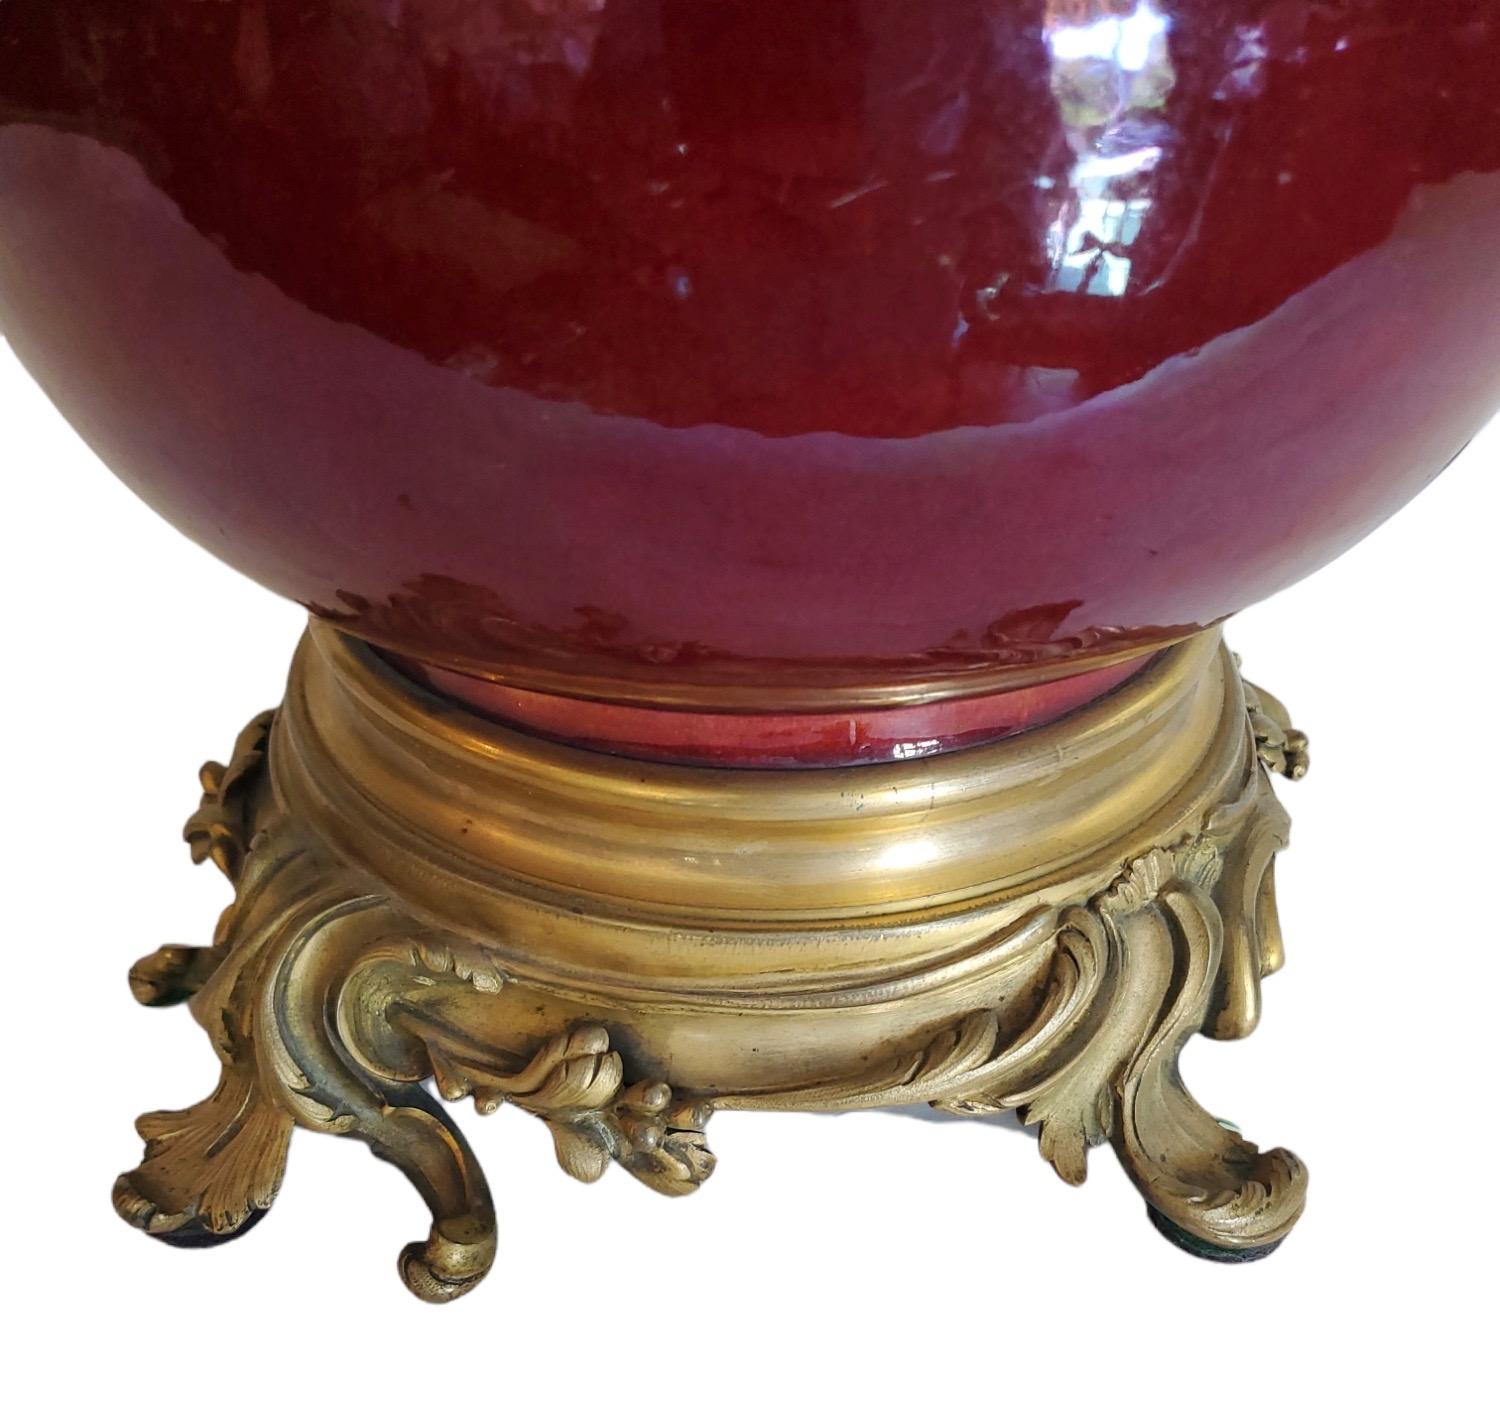 Very fine 19th century Chinese ox blood porcelain vessel converted to lamp with the finest 19th century French bronze mounts. Custom silk shade with metallic details. Shade is 15